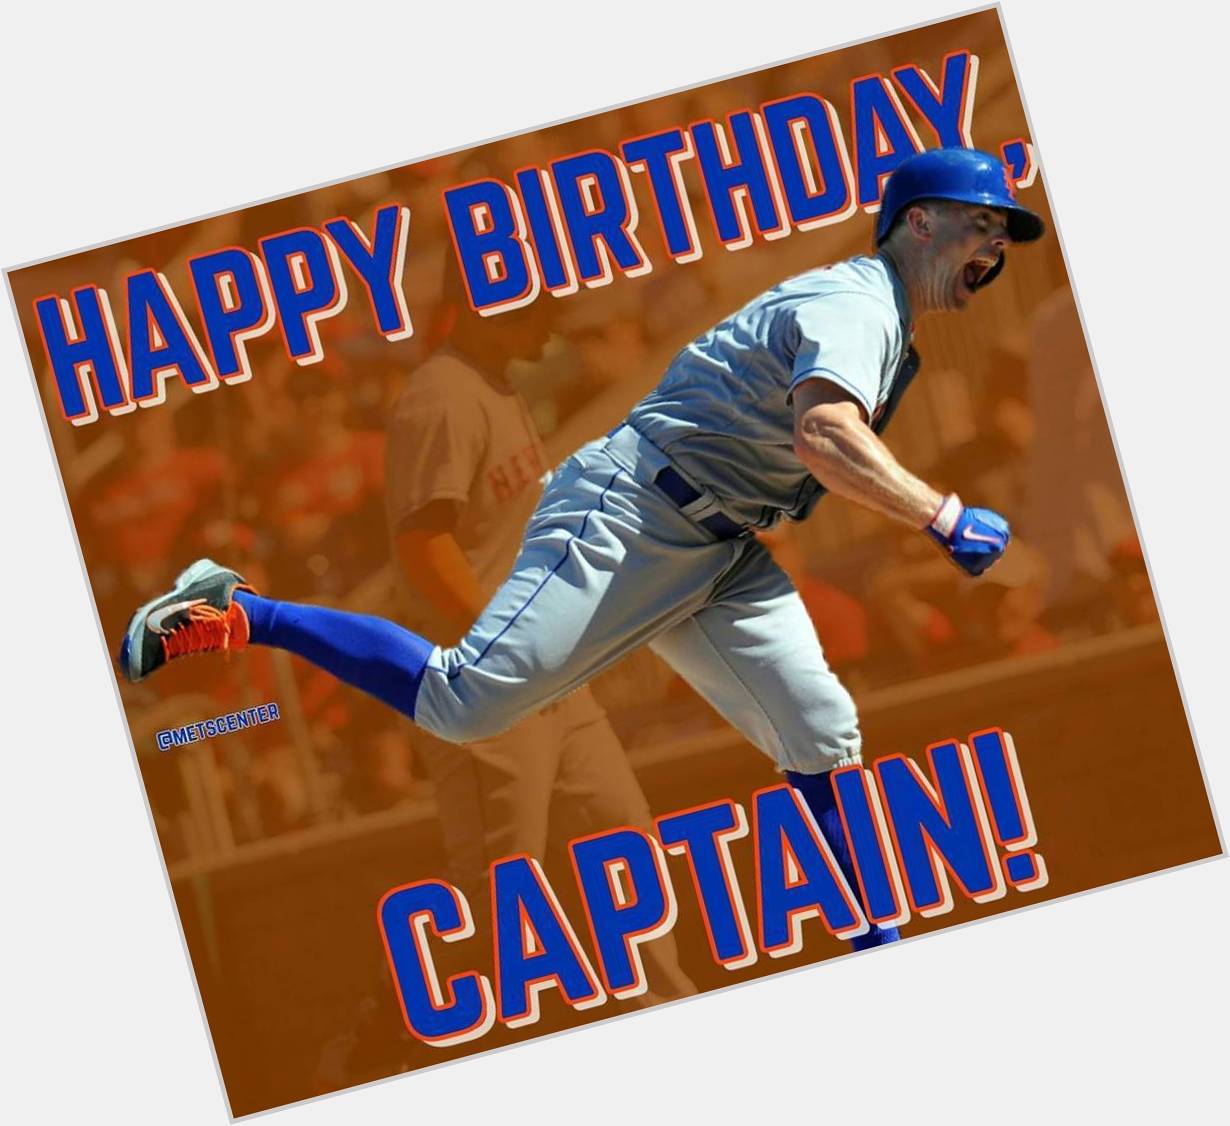 Citifield Fan View: Happy birthday to David Wright! There\s no doubt about it, Wright is one of the 